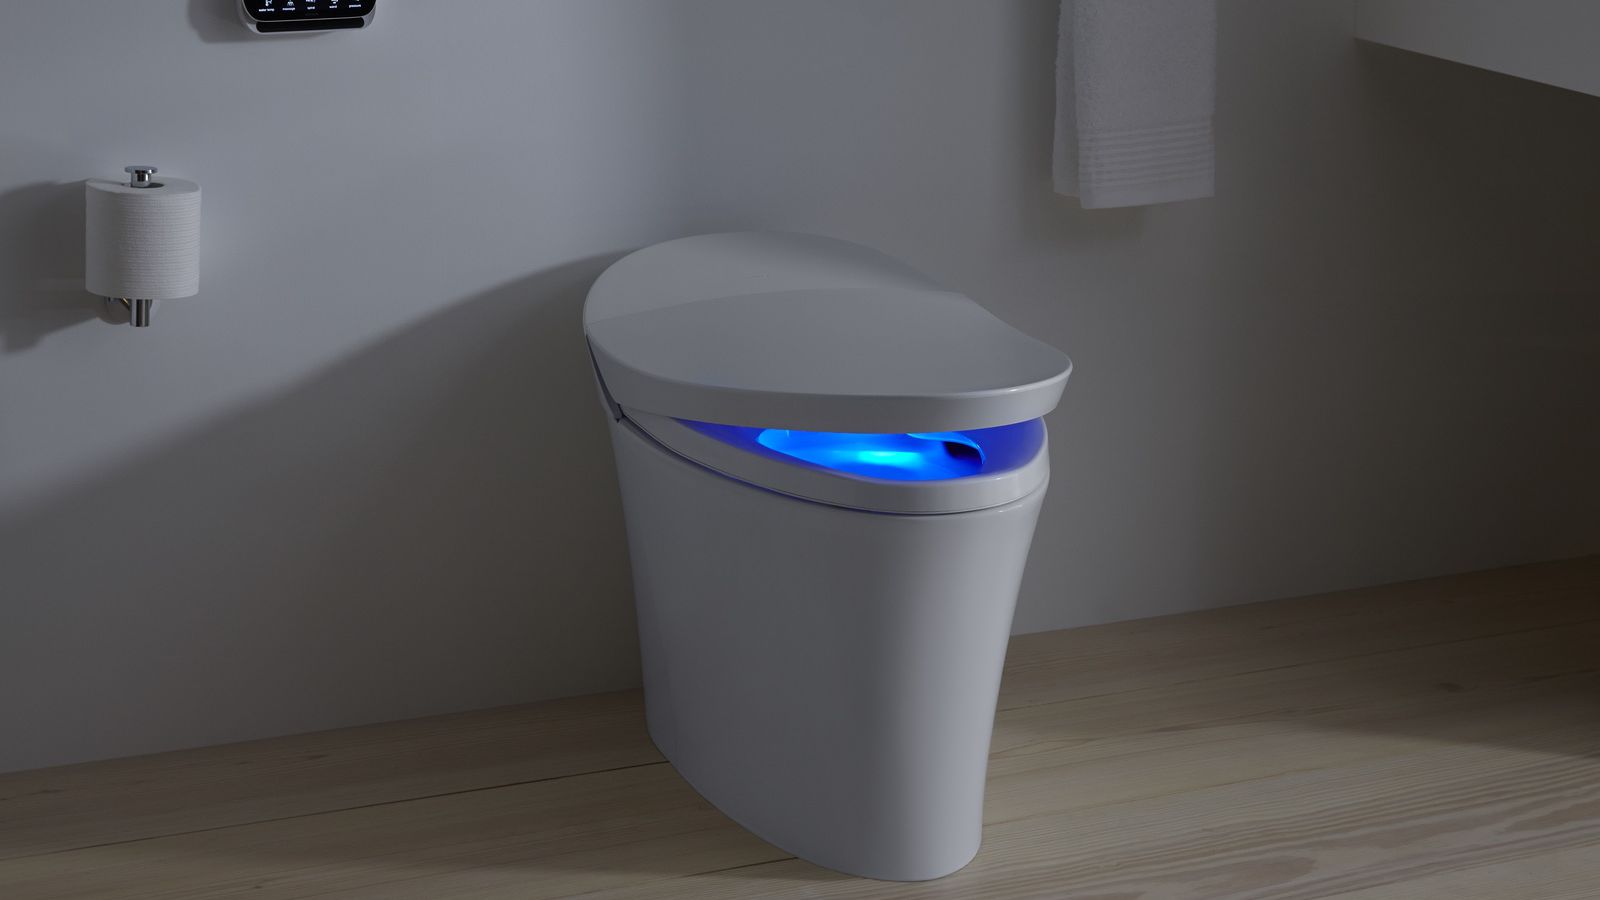 Does a Smart Toilet Really Increase the Beauty of a Bathroom A Good Looking Bathroom-Friendly Toilet